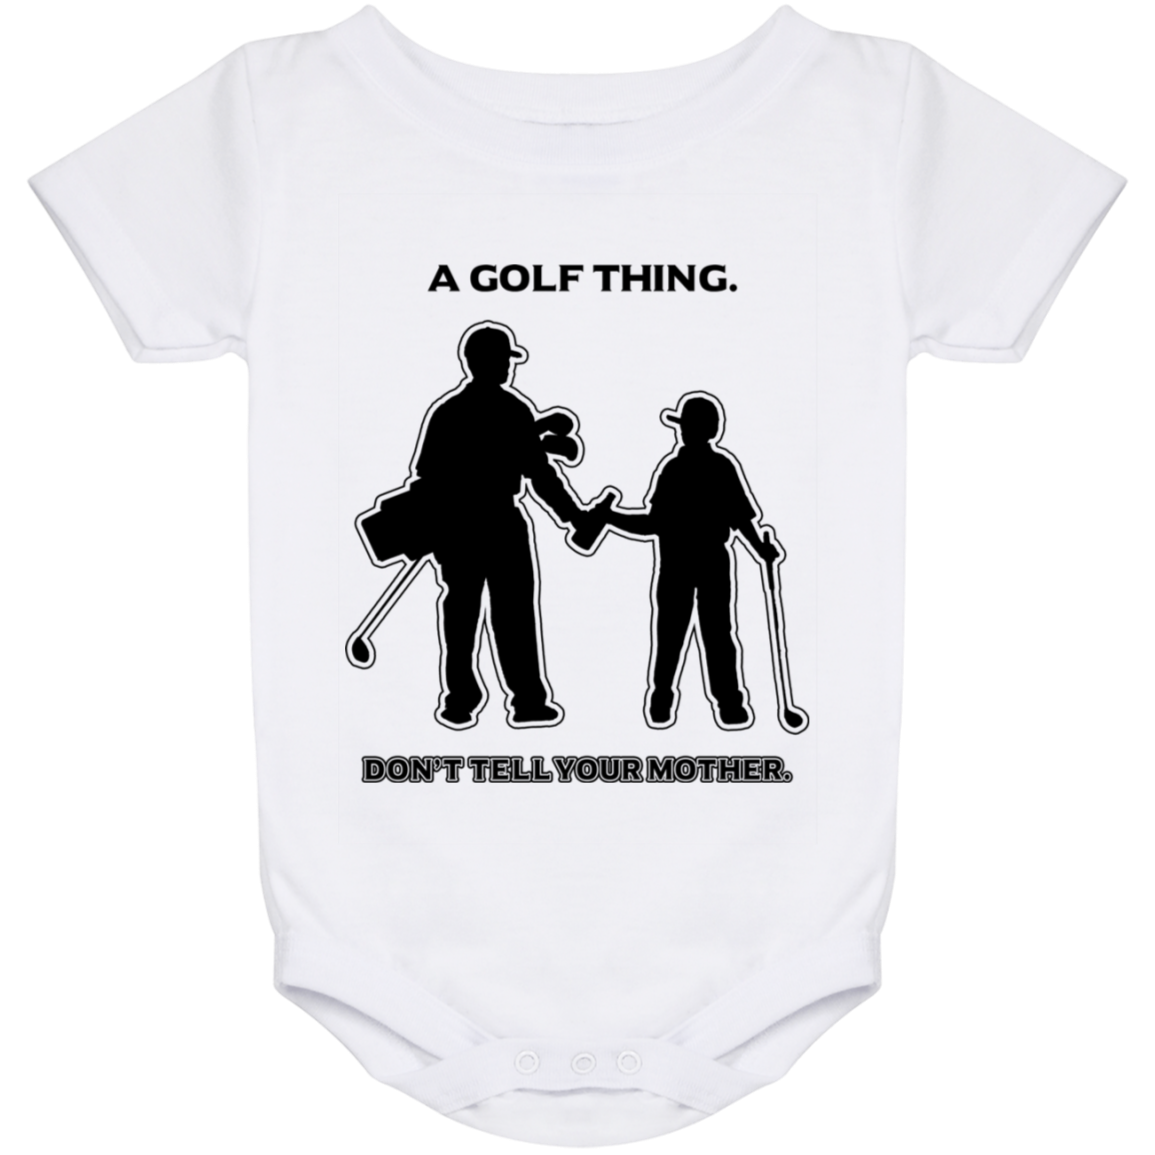 OPG Custom Design #7. Father and Son's First Beer. Don't Tell Your Mother. Baby Onesie 24 Month